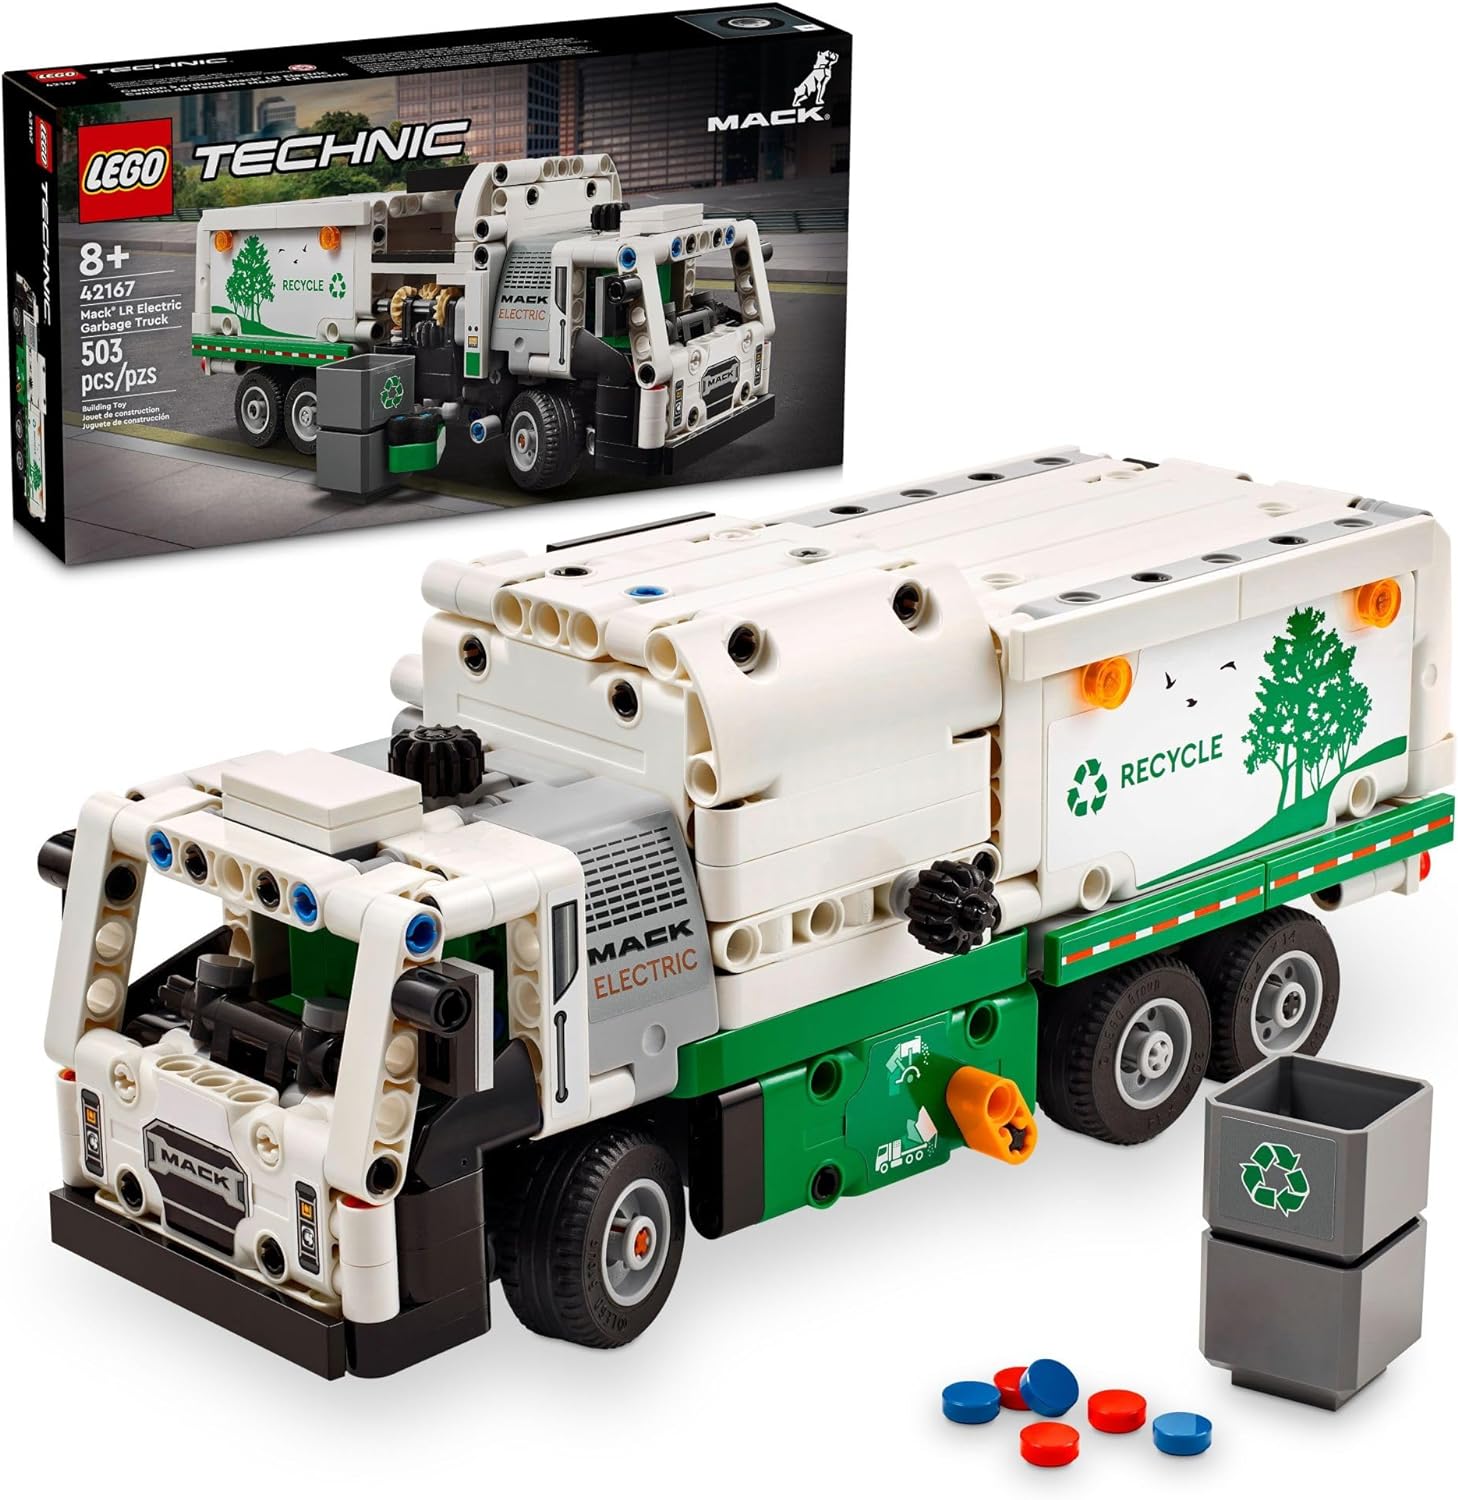 LEGO Technic Mack LR Electric Garbage Truck Toy_ Buildable Kids Truck for Pretend Play_ Great Gift